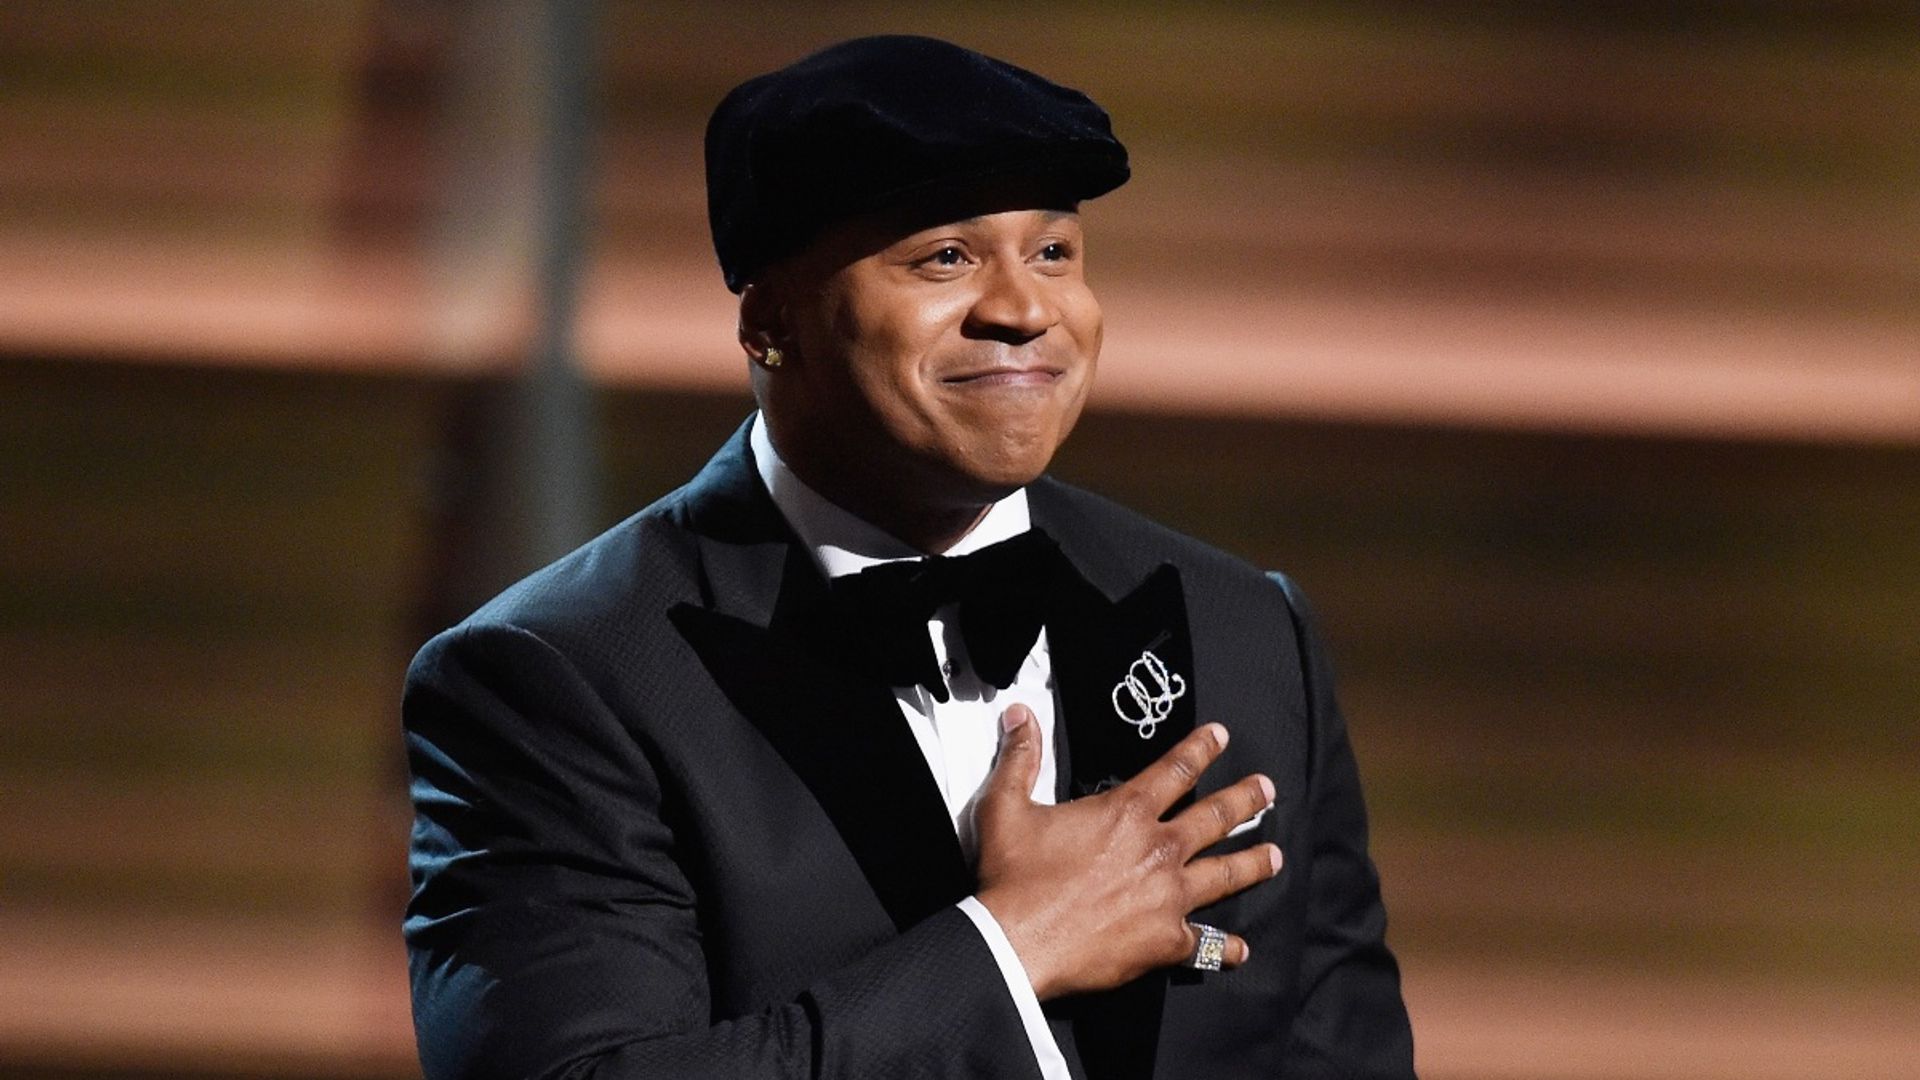 LL Cool J in suit